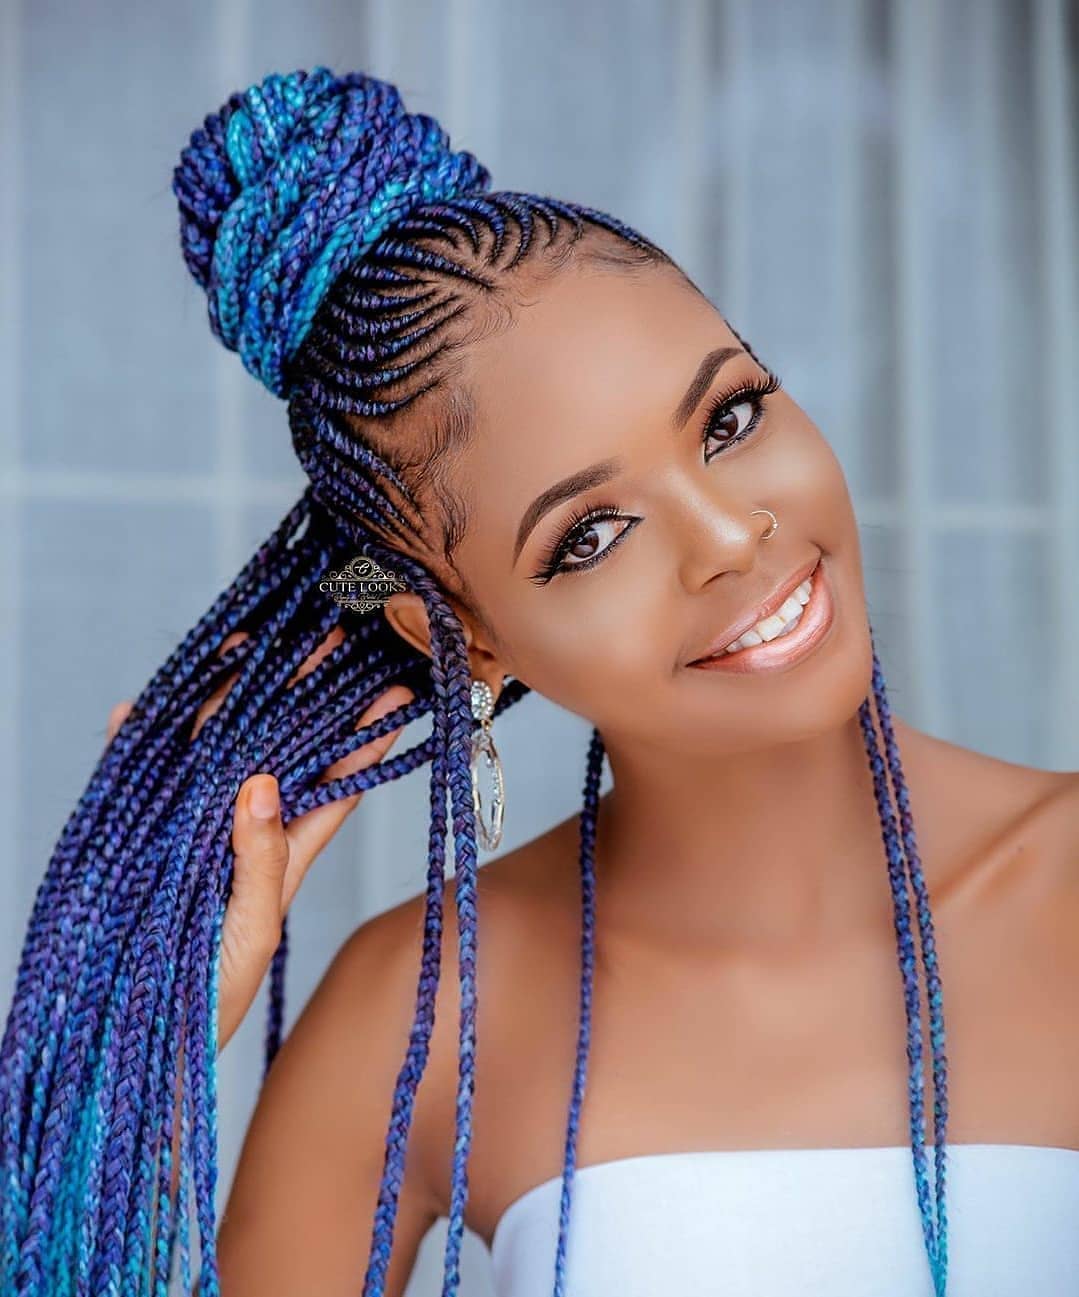 20 Attractive And Unique Braided Hairstyles For Black Women In 2021 Fashion Nigeria